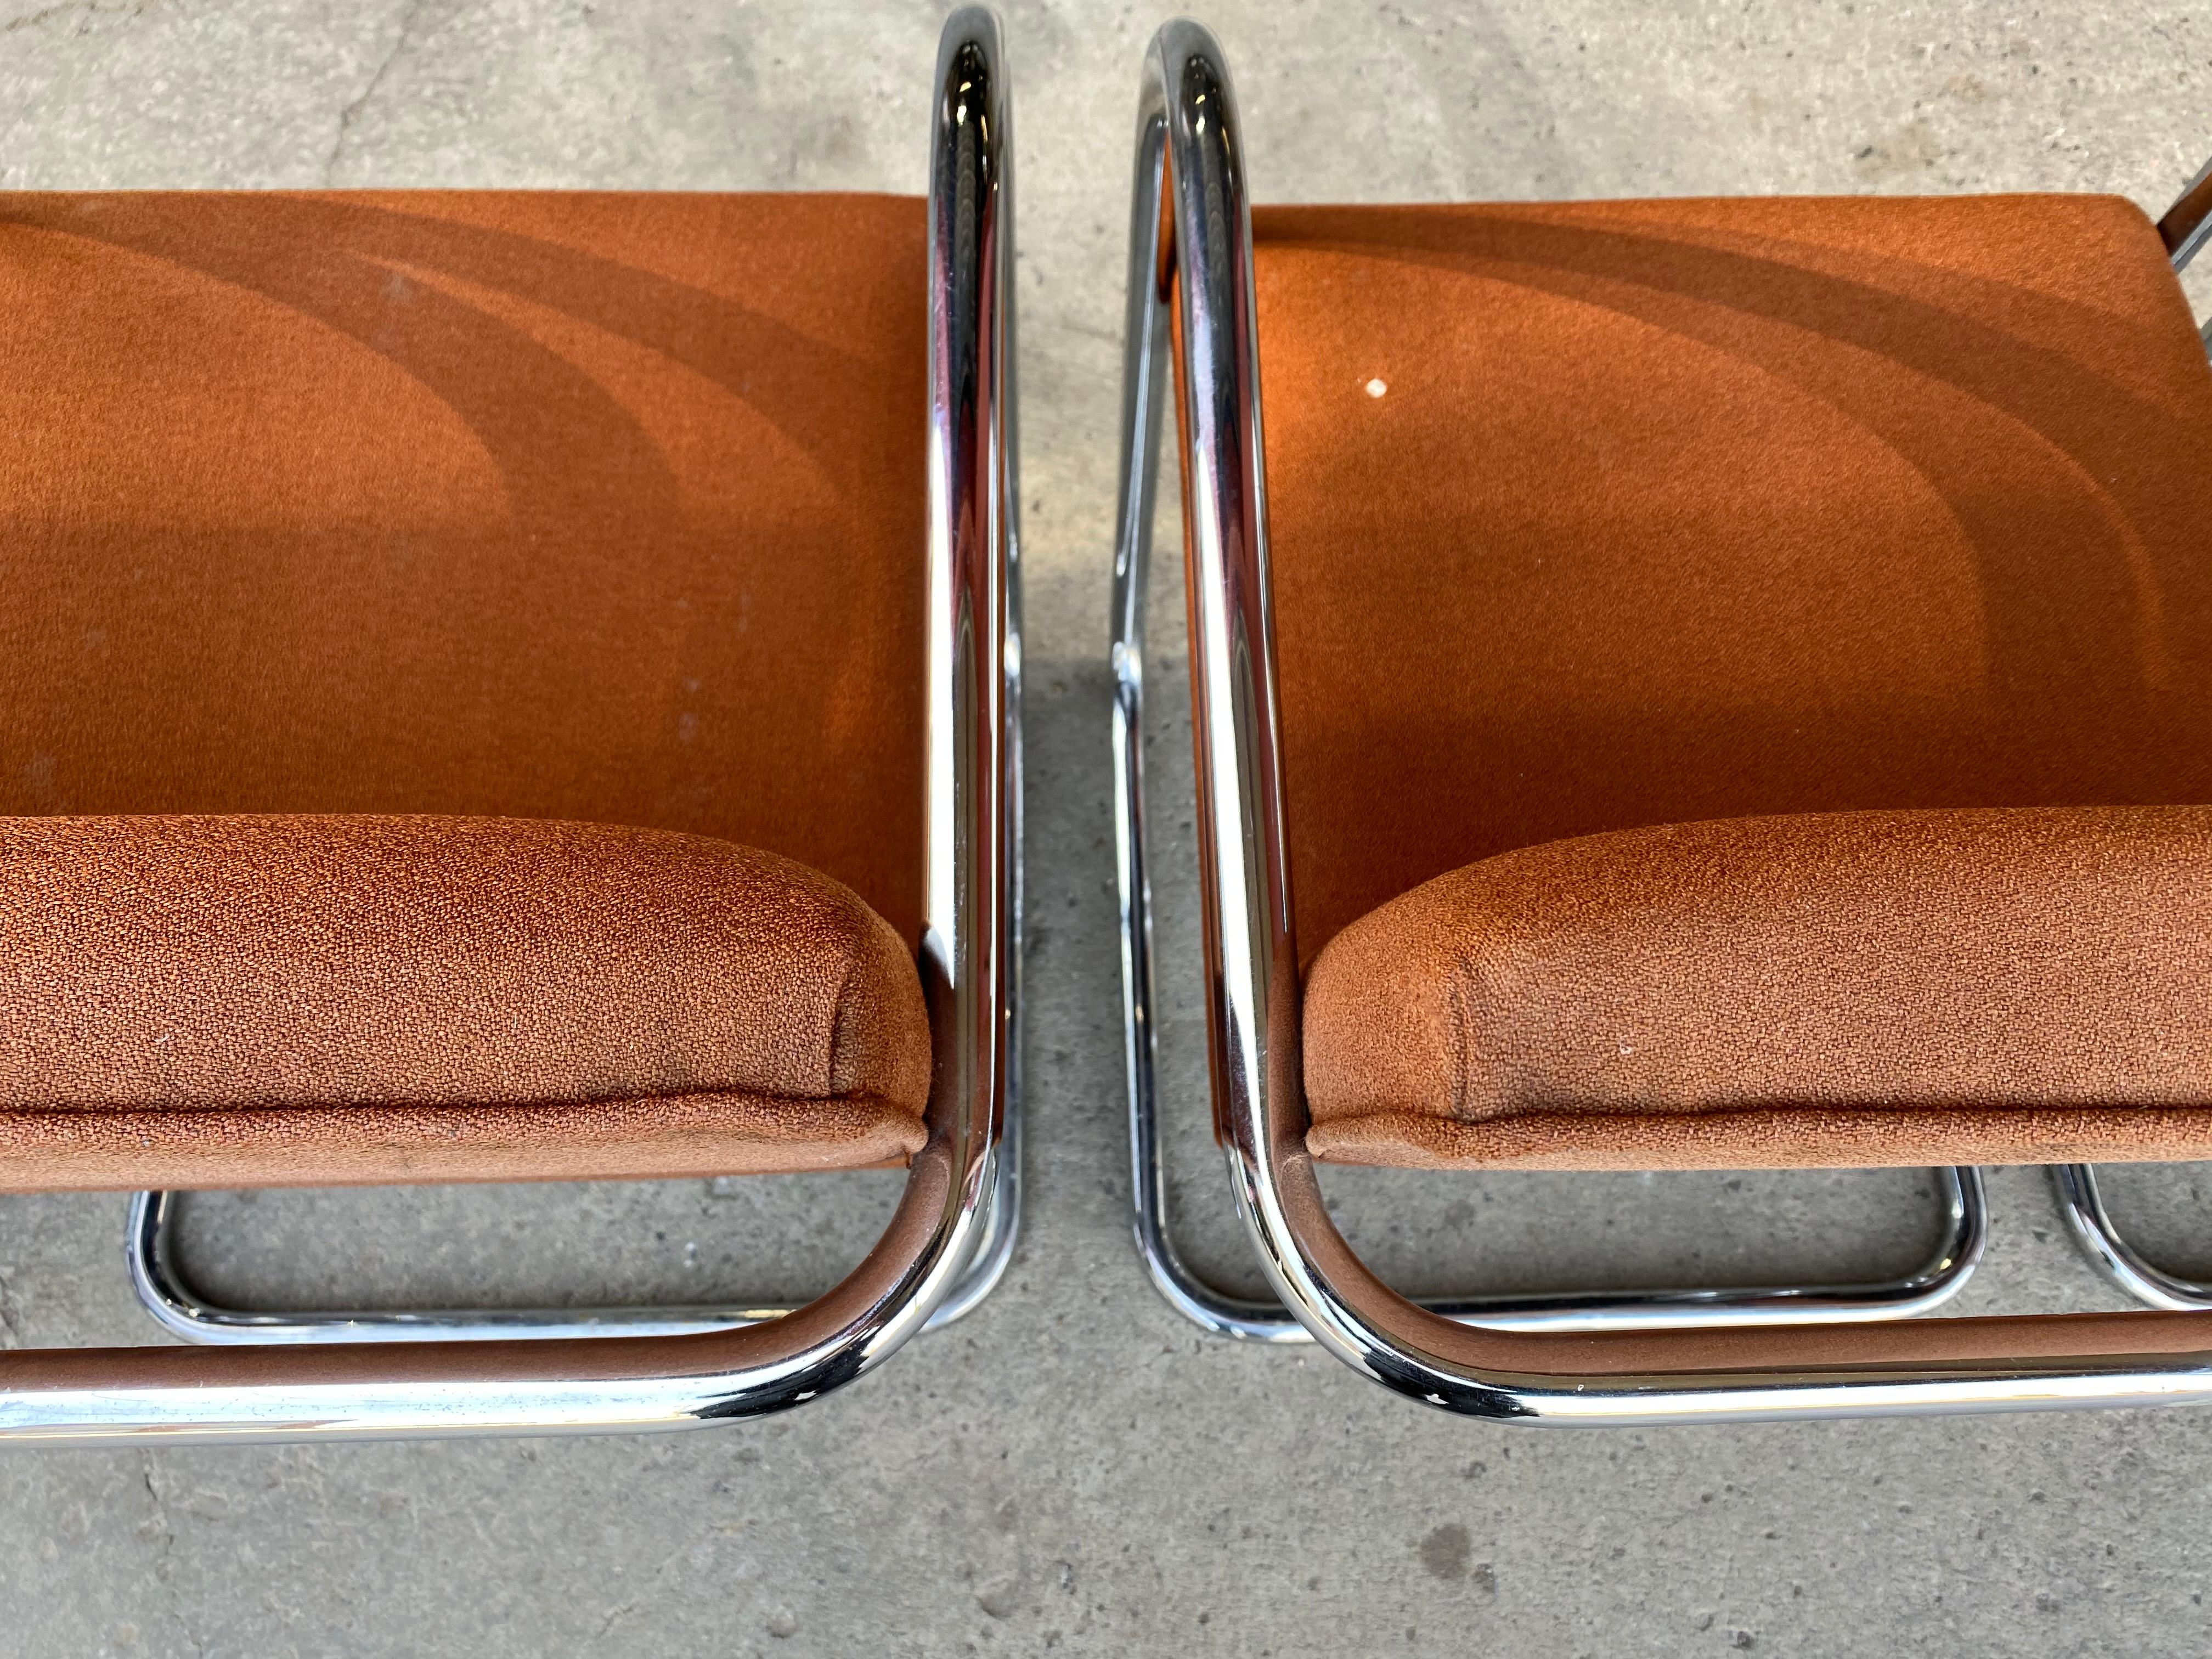 American Classic Midcentury Brno Chairs by Mies van der Rohe for Gordon International For Sale